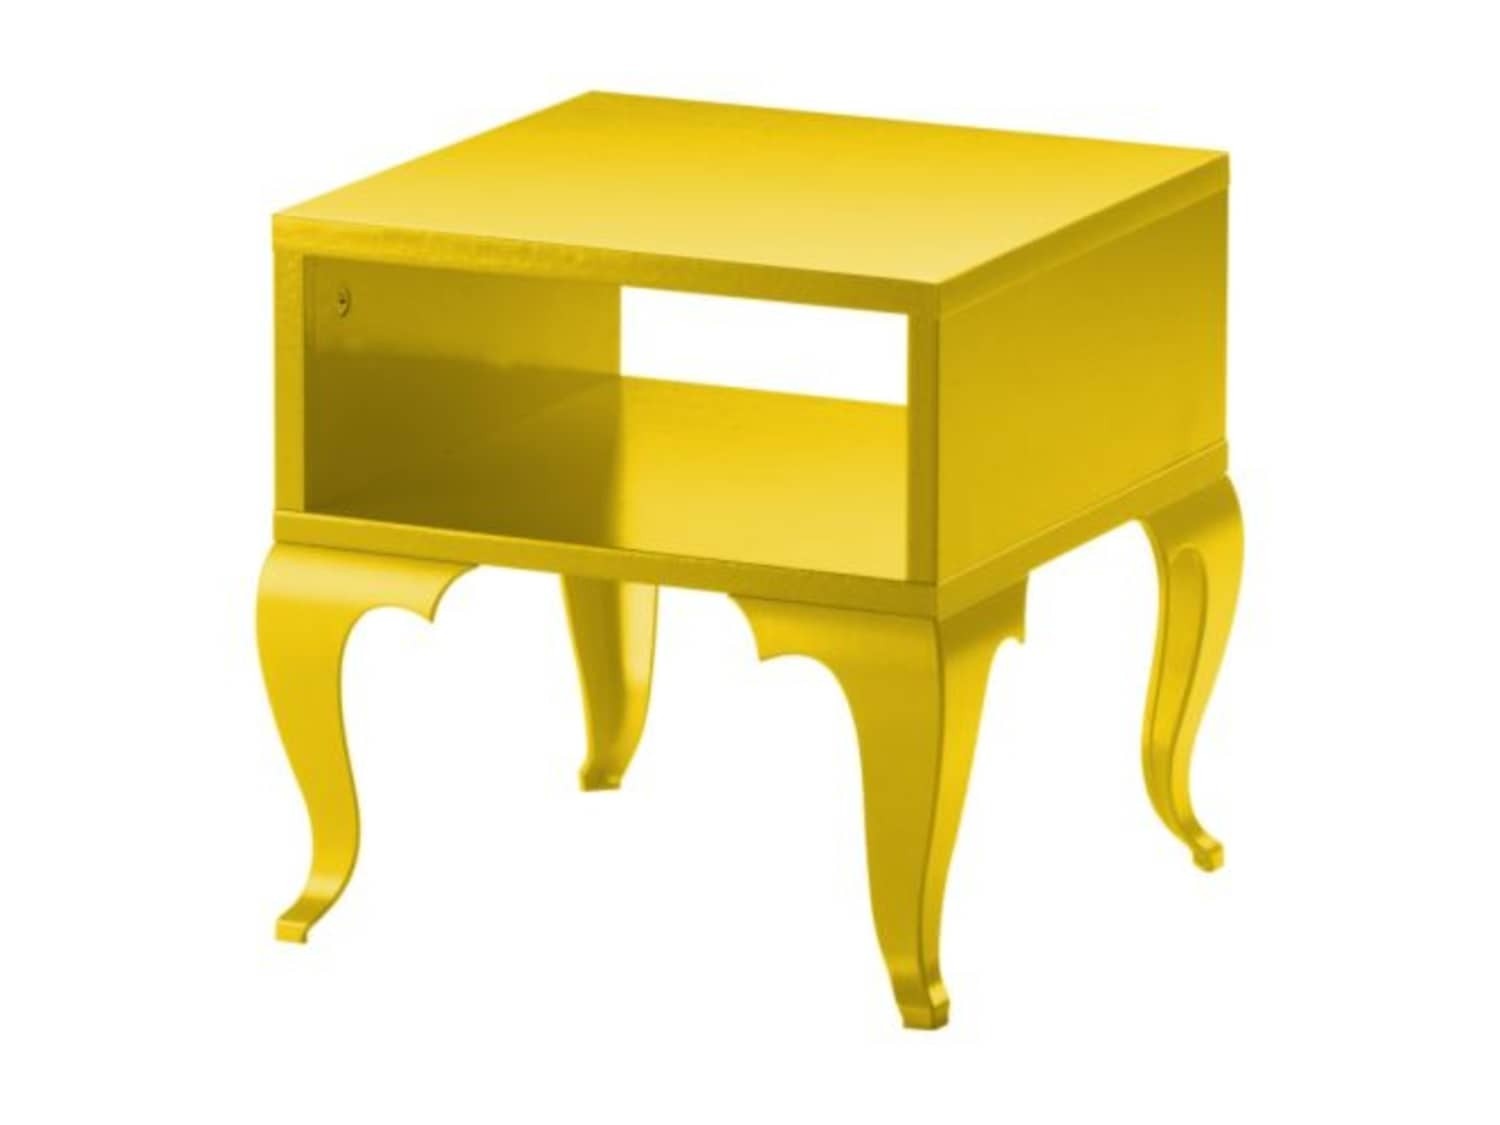 Ikea side tables with drawers